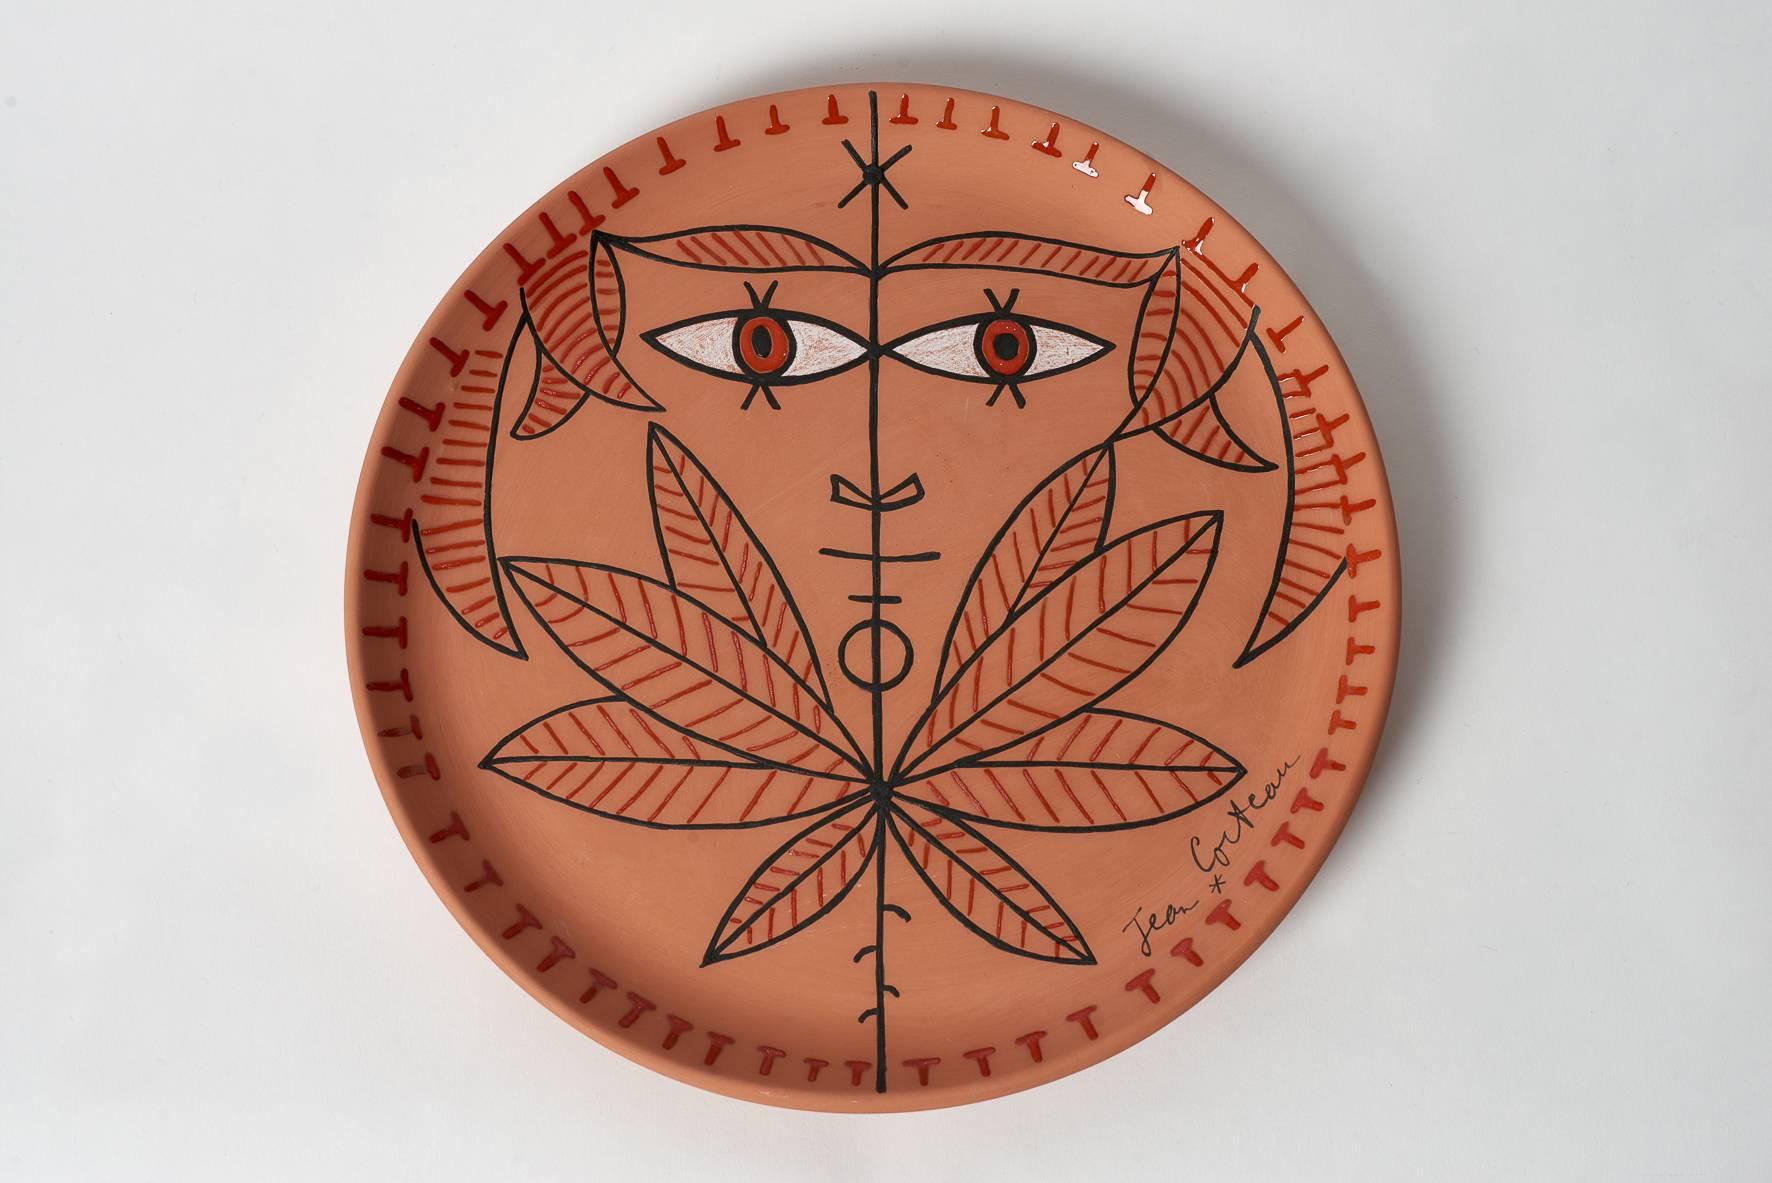 Jean Cocteau ceramic dish - Cornefeuilles, 1962
Edition originale Madeline & Jolly with certificat d'origine dated et signed from 1962.
Red earthenware with black / white/ orange enamel, measure: Diameter 33 cm.
Numbered 3 on 5 copies (Cornefeuilles